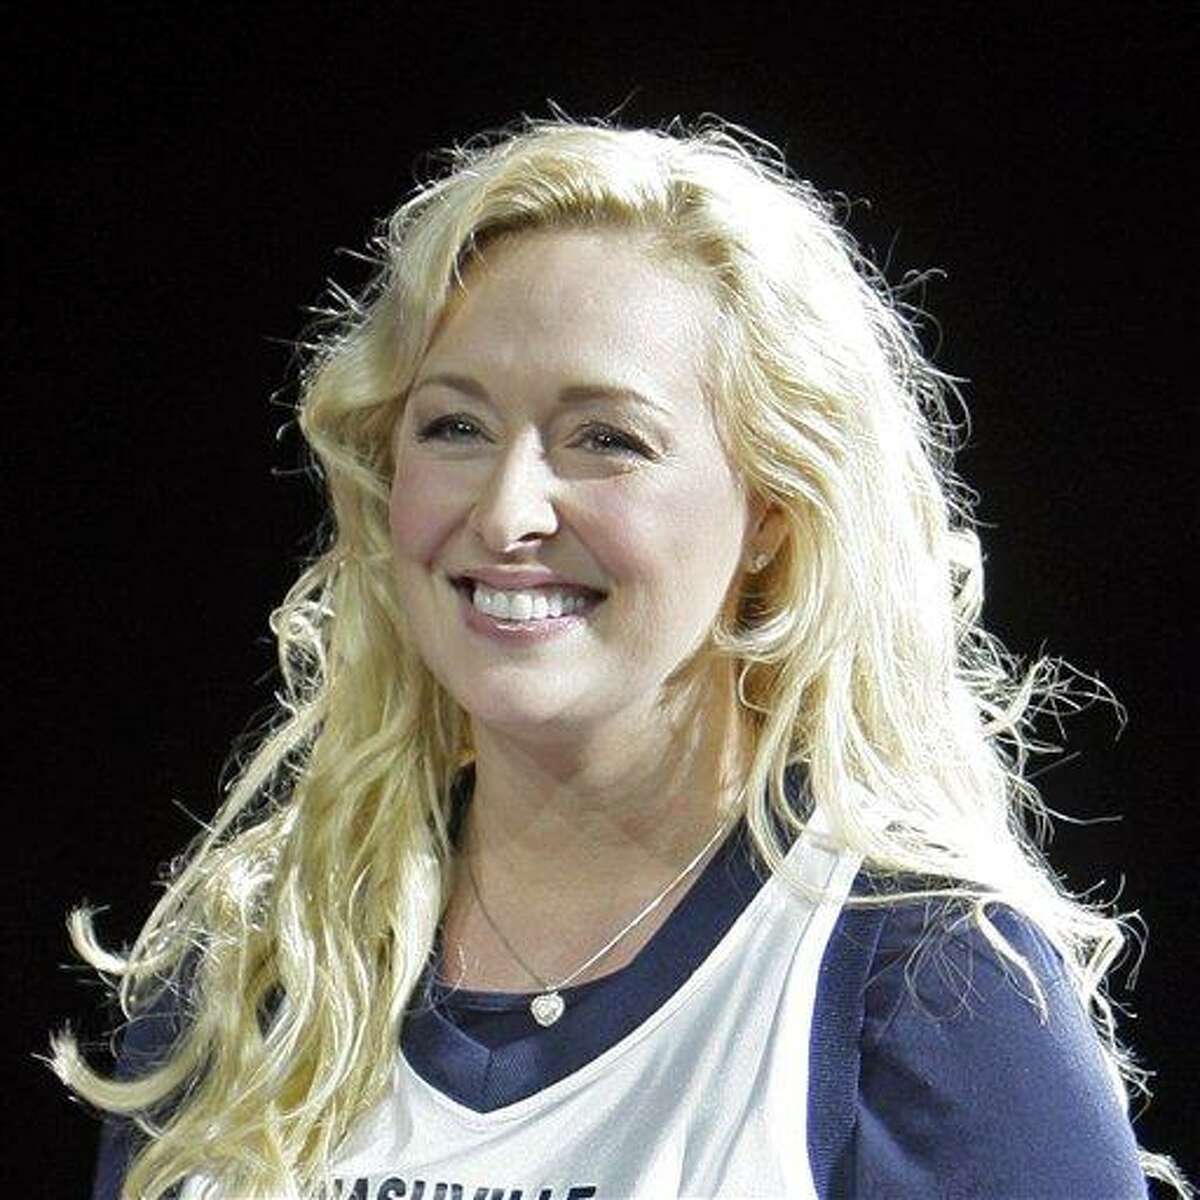 Country star Mindy McCready dies from self-inflicted gunshot wound